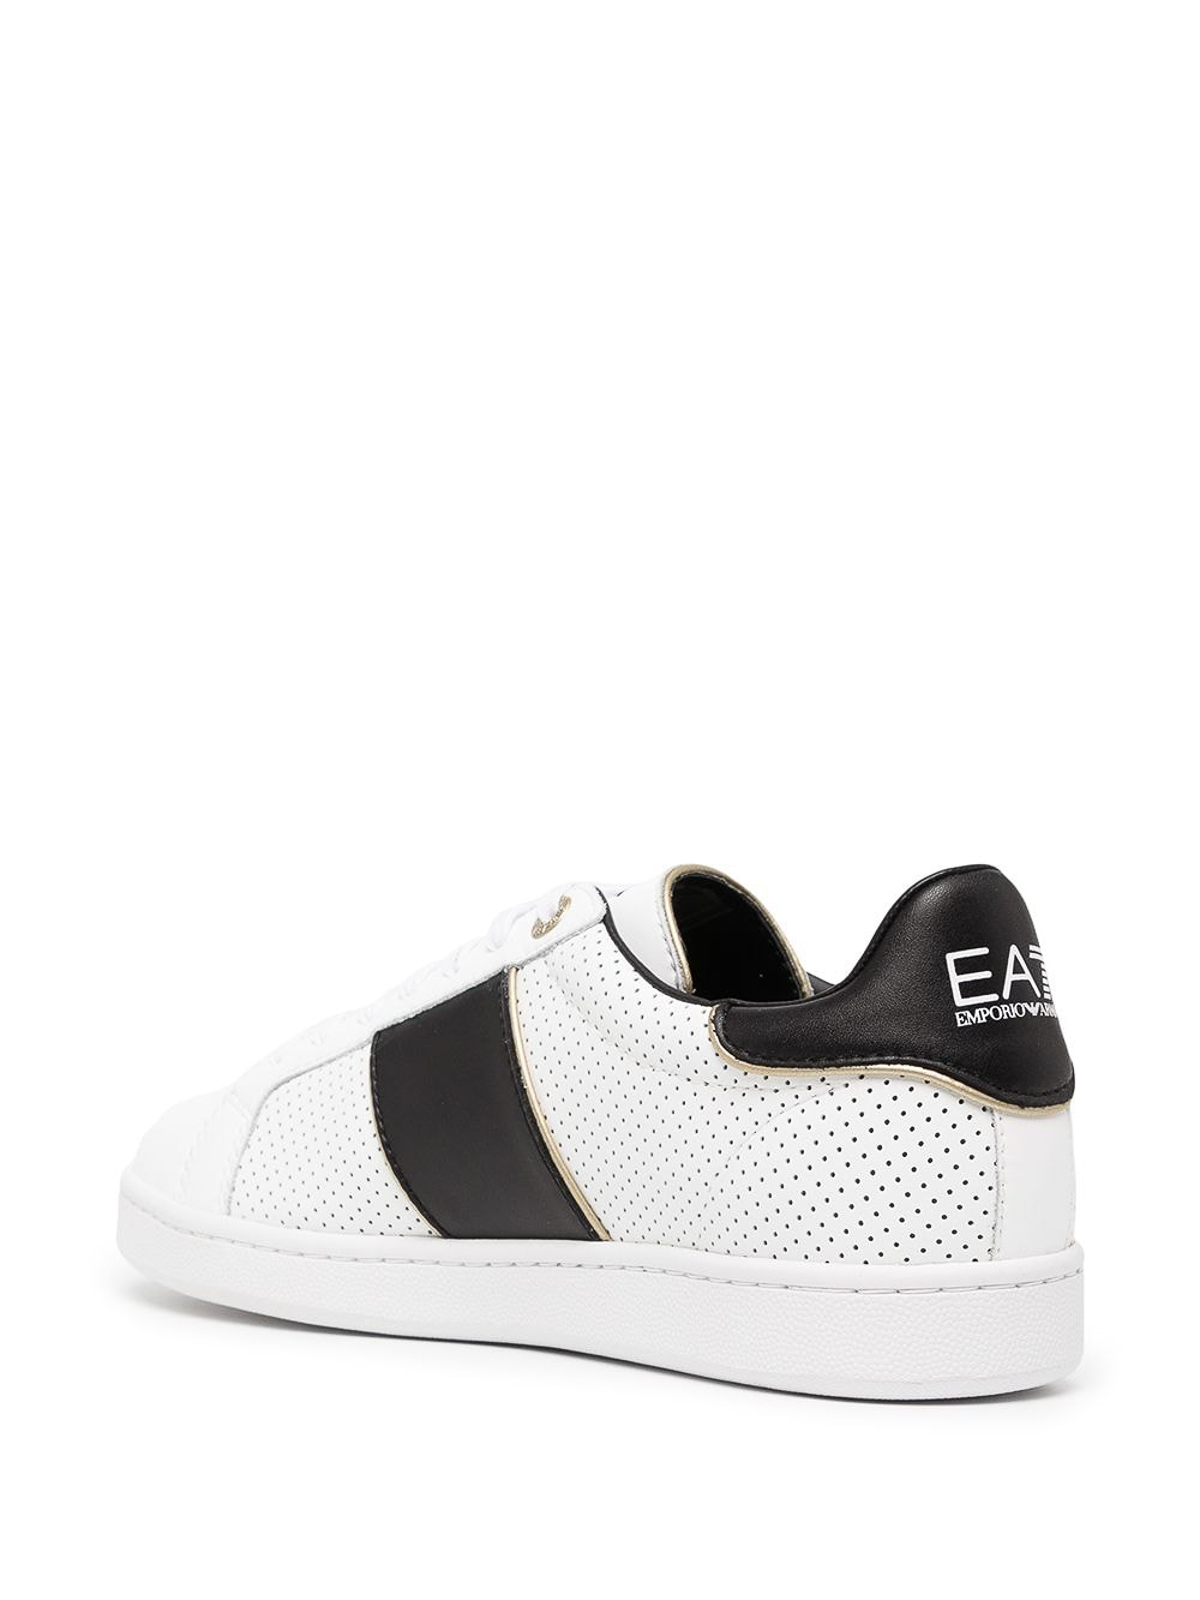 Selvforkælelse at forstå Demontere Trainers EA7 Emporio Armani - Classic performance sneakers - X8X102XK258Q678